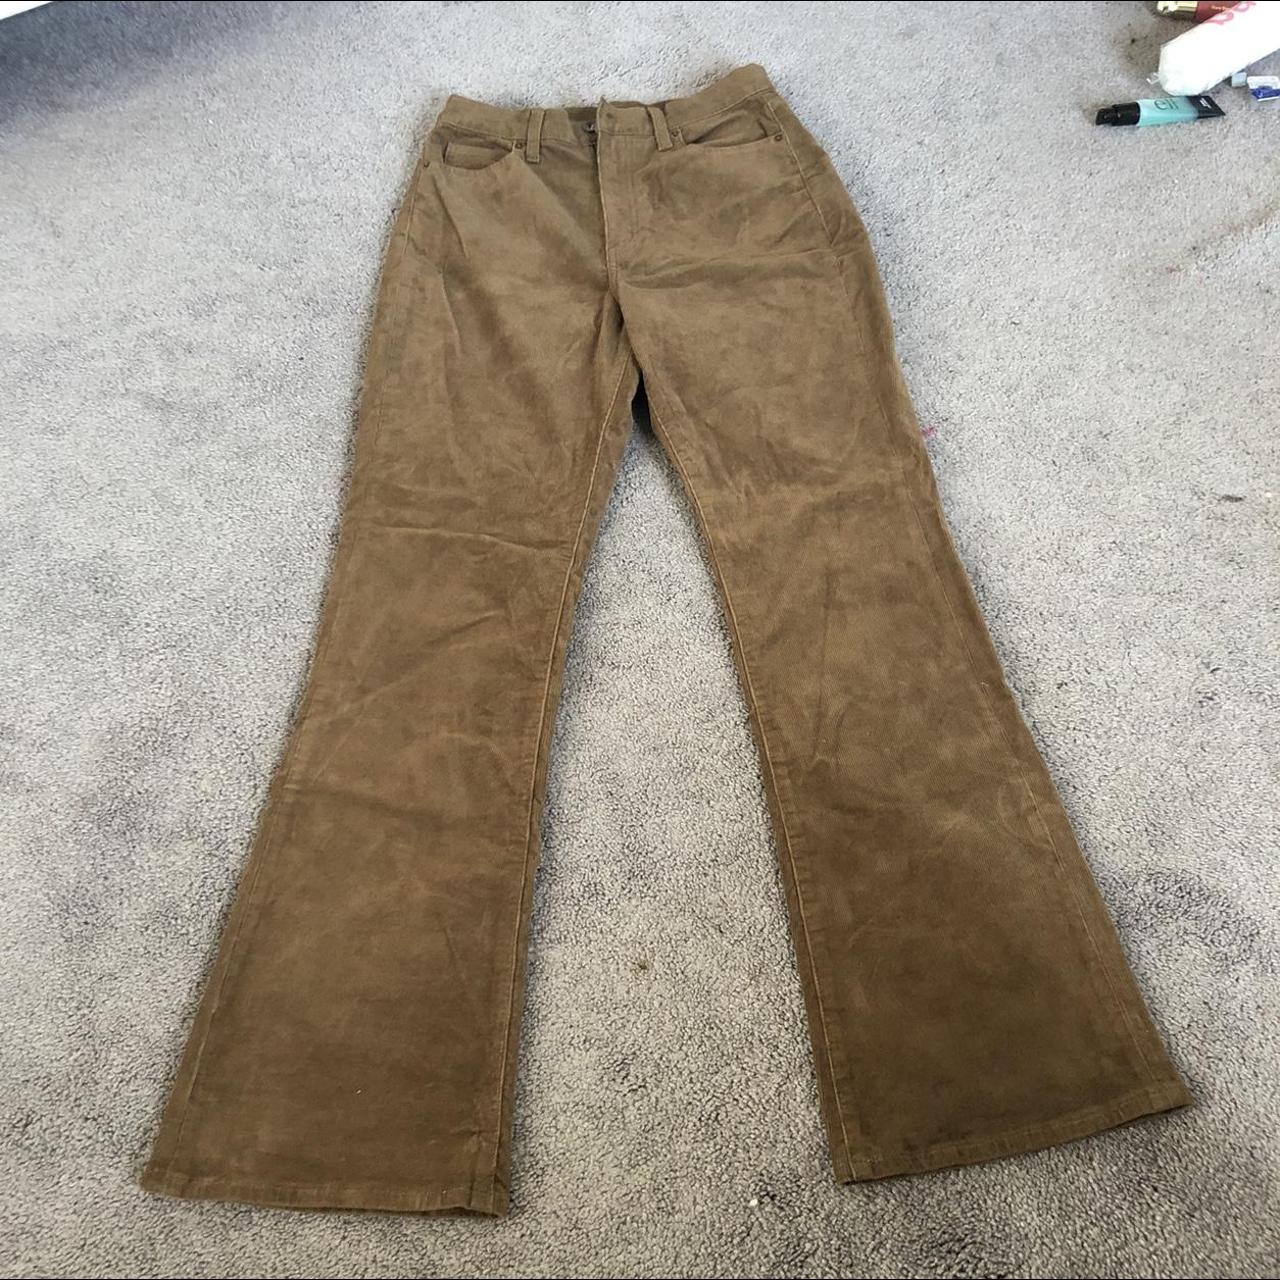 Uniqlo womens Small Brown Corduroy Pants Tapered Cropped 27-30inch | eBay